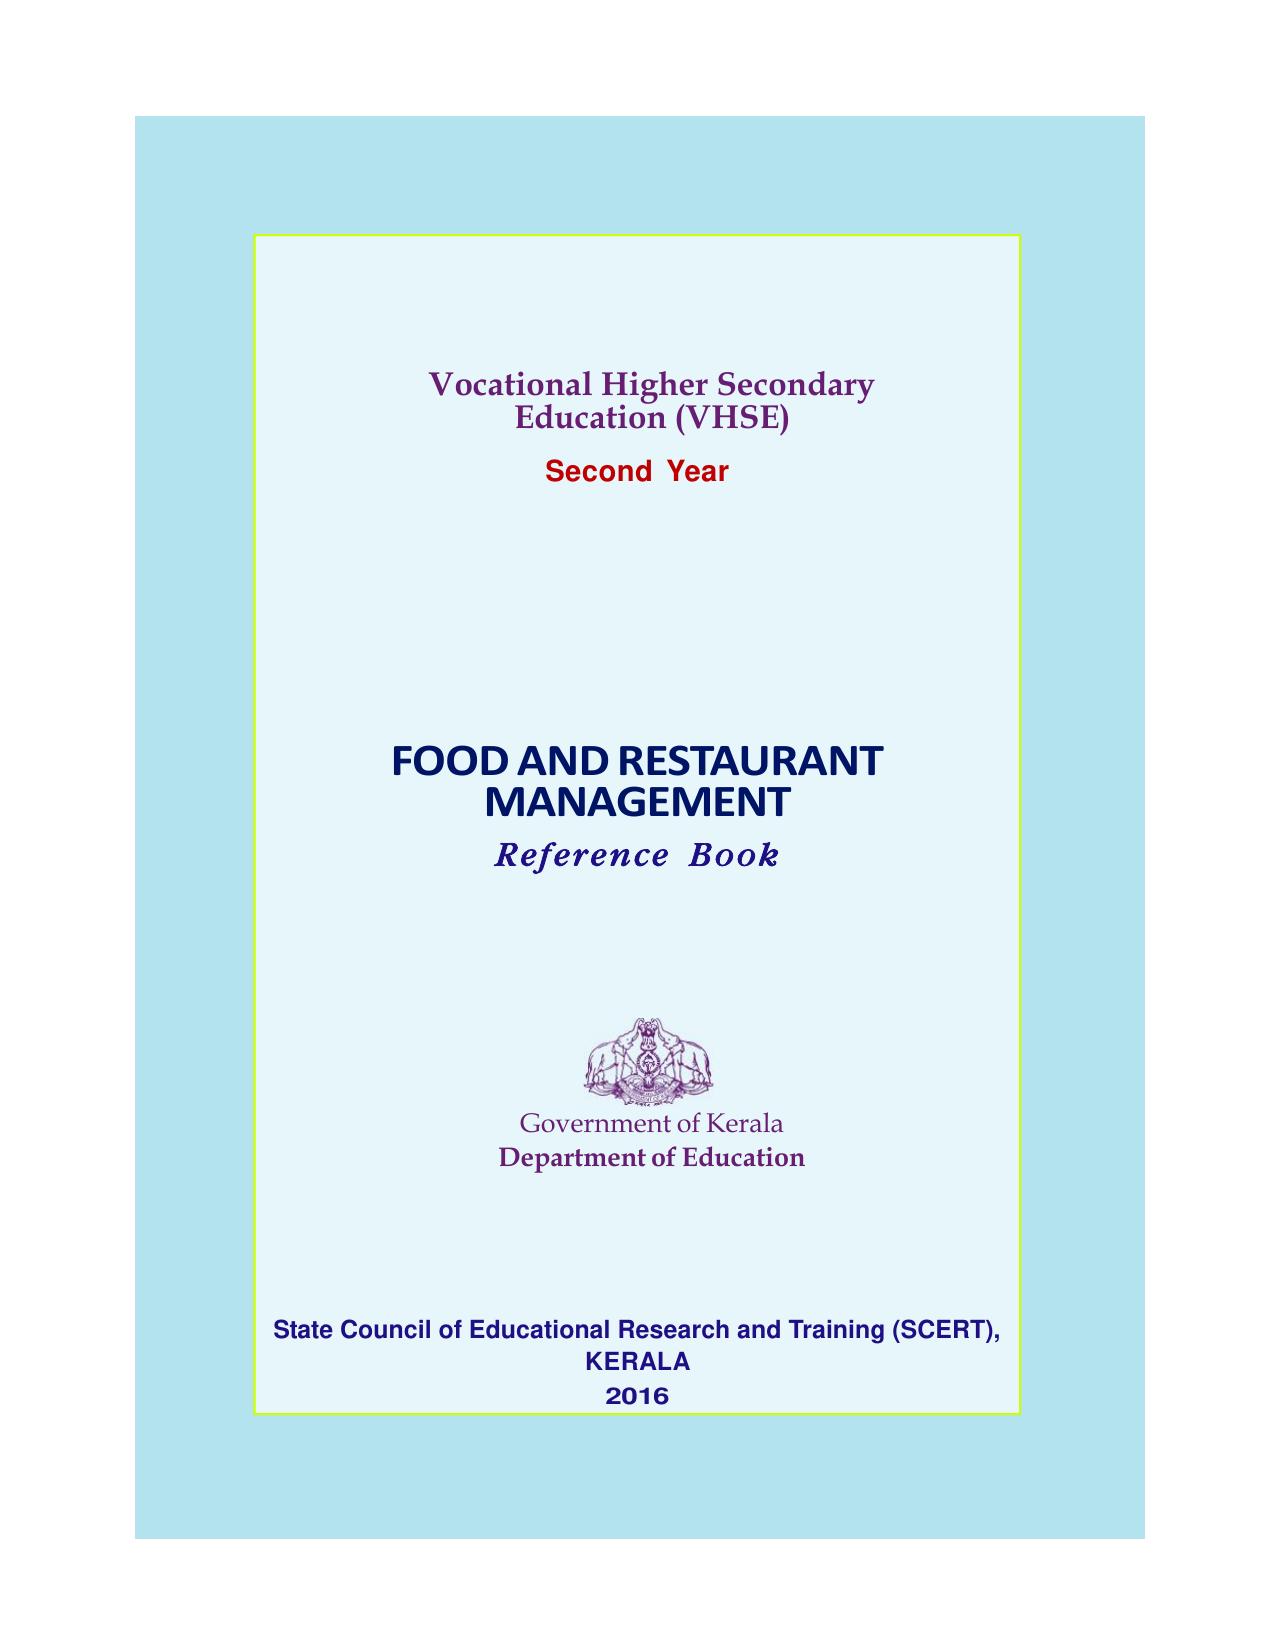 Food and Restaurant Management 2016